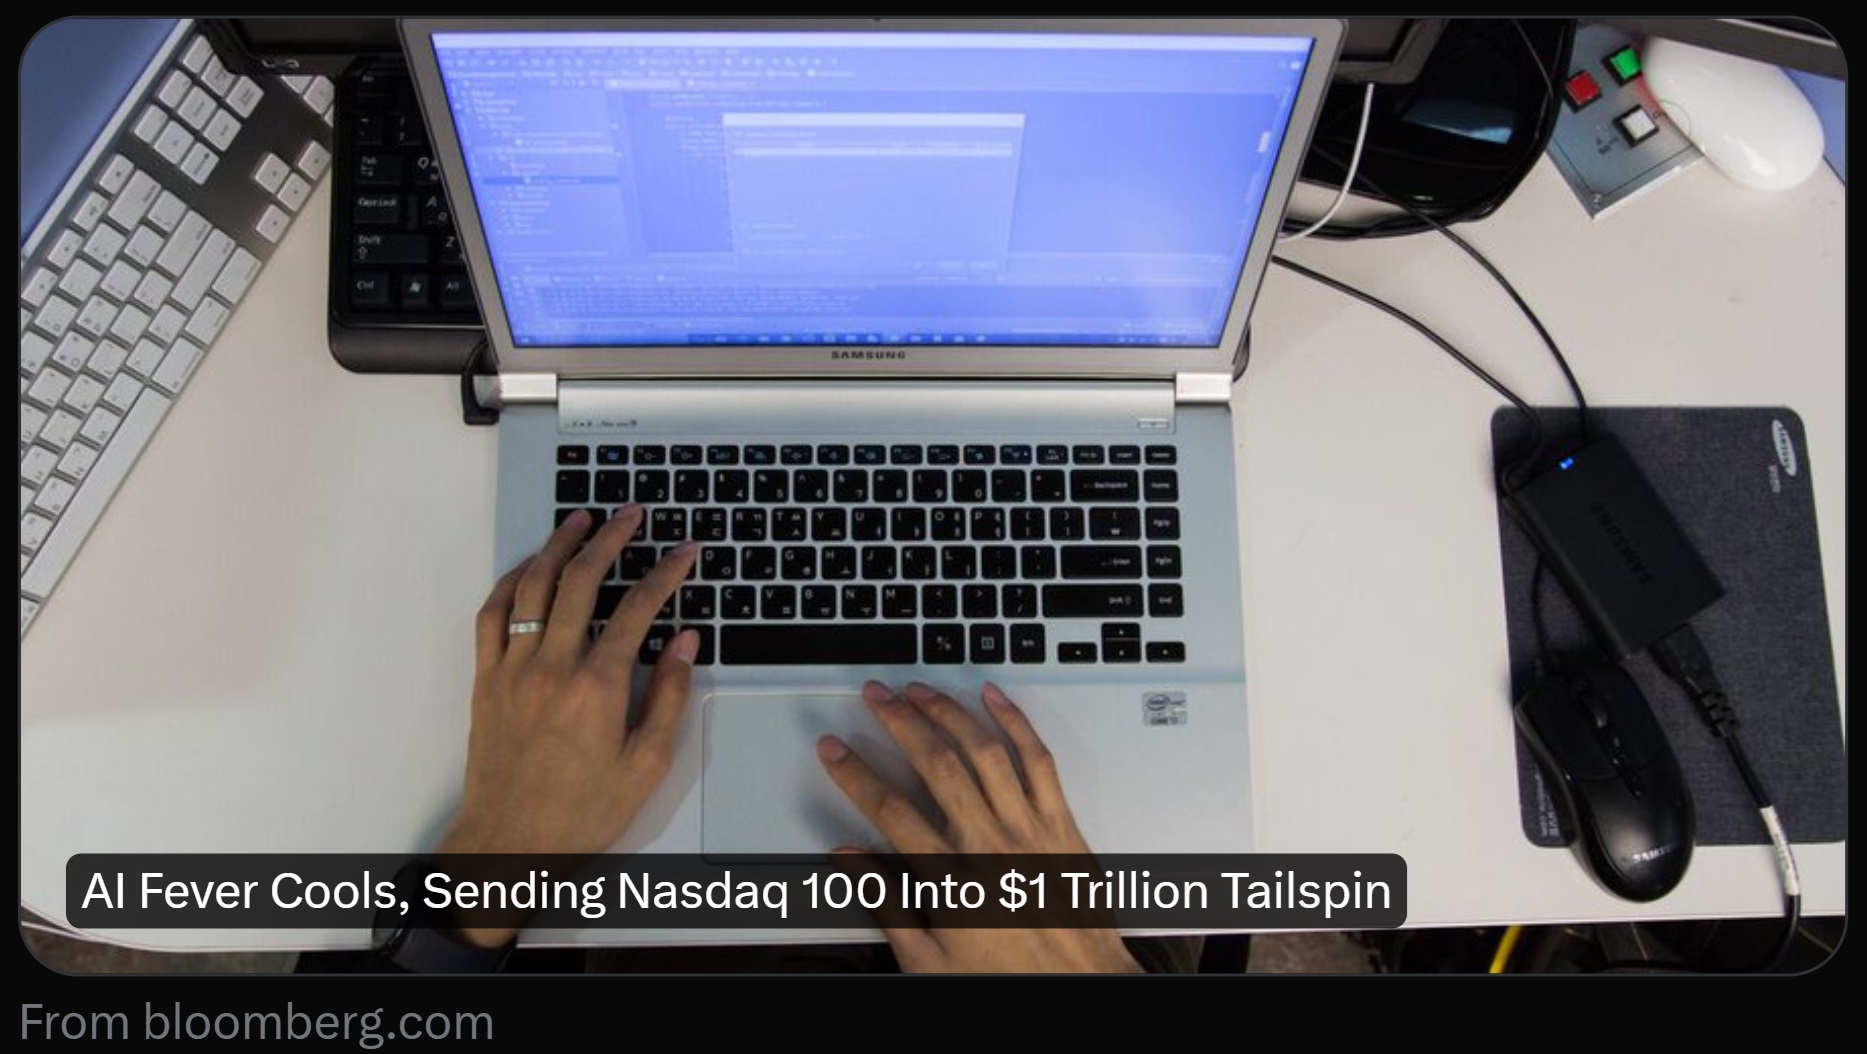 AI Fever Cools | Sending Nasdaq 100 Into $1 Trillion Tailspin - Bloomberg